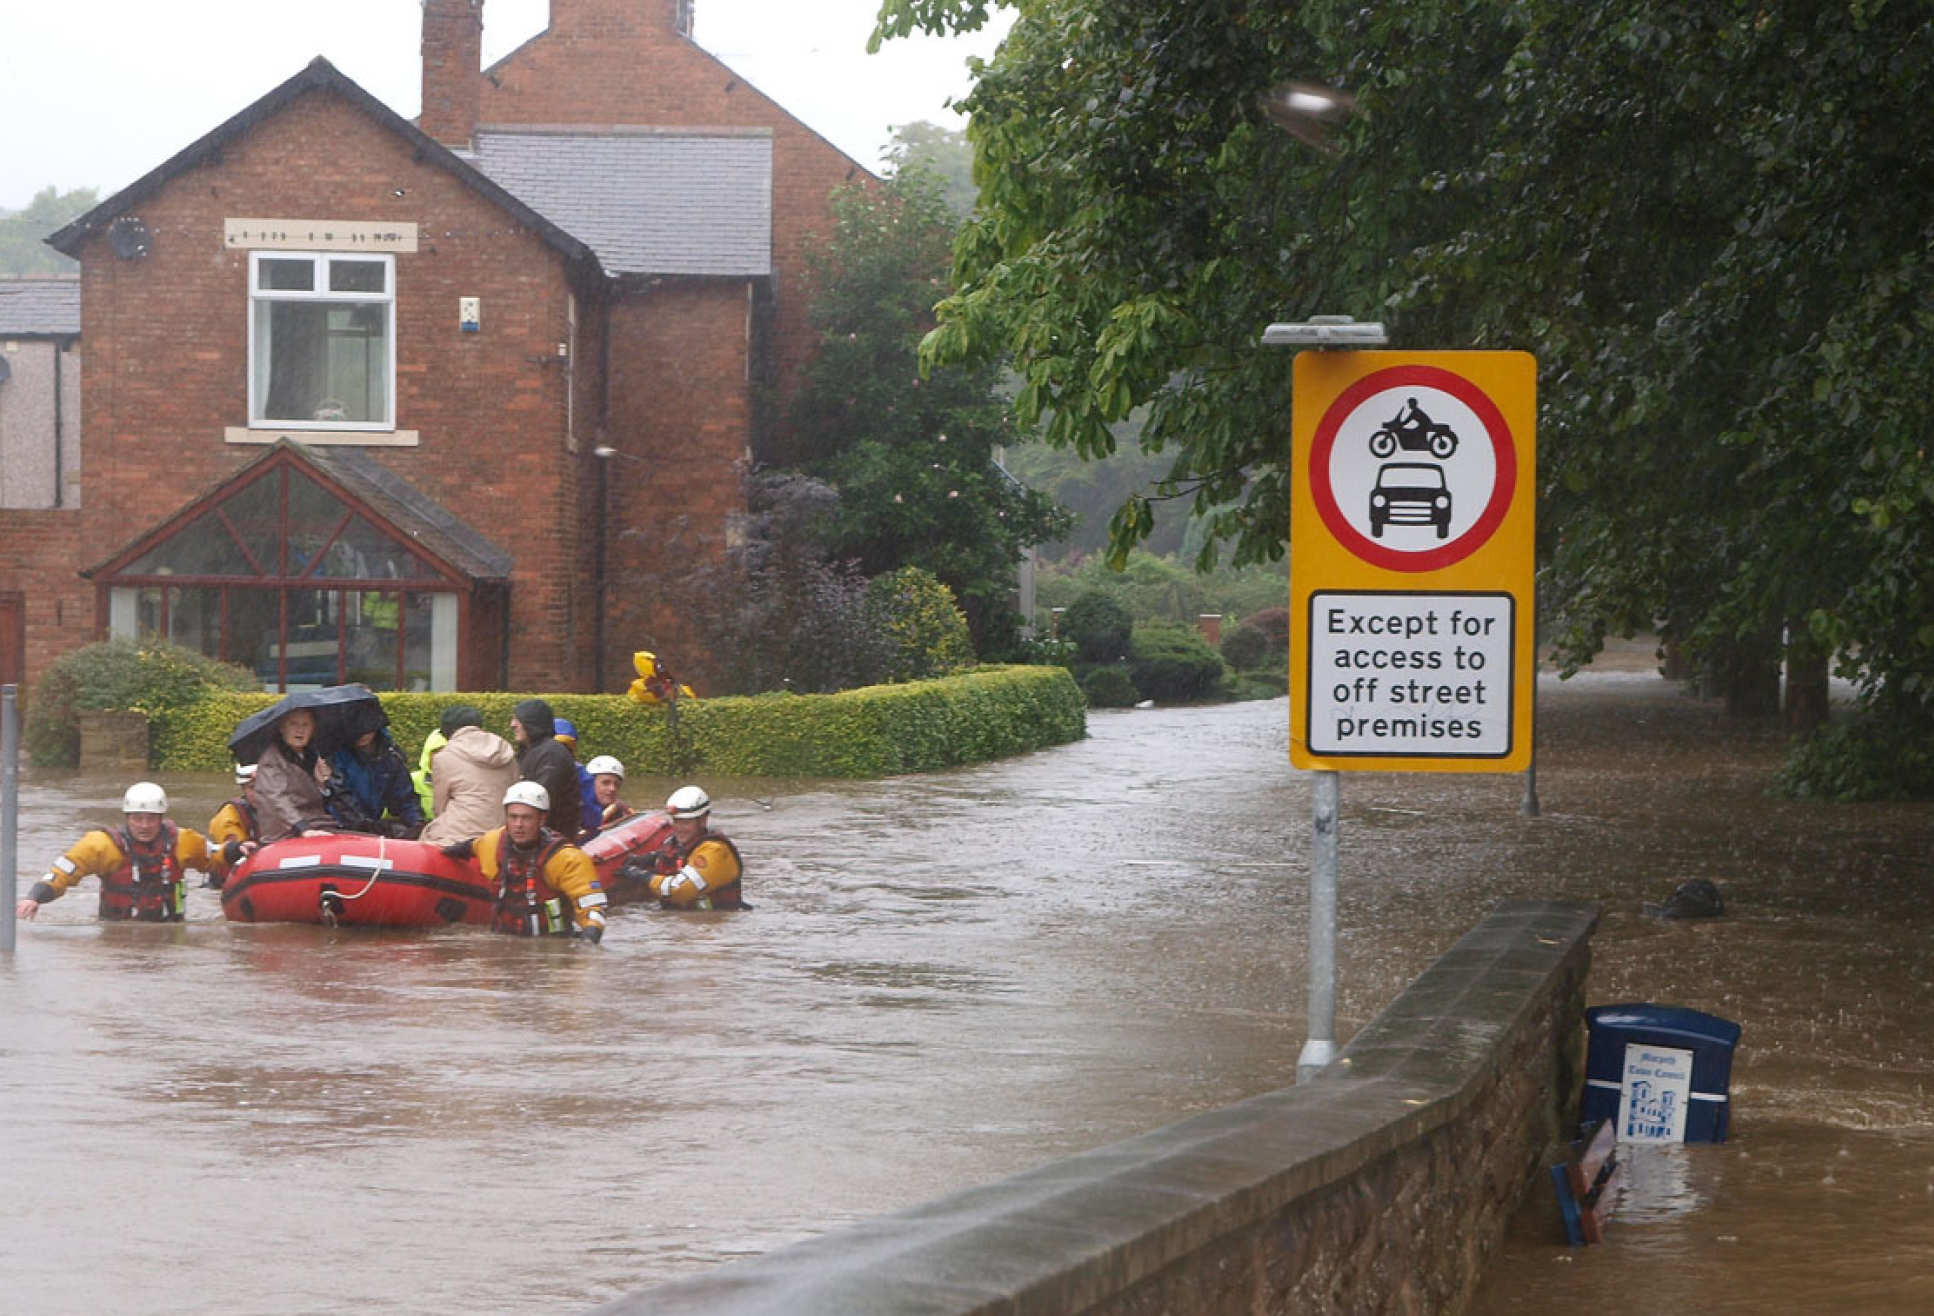 Flooding in an English town